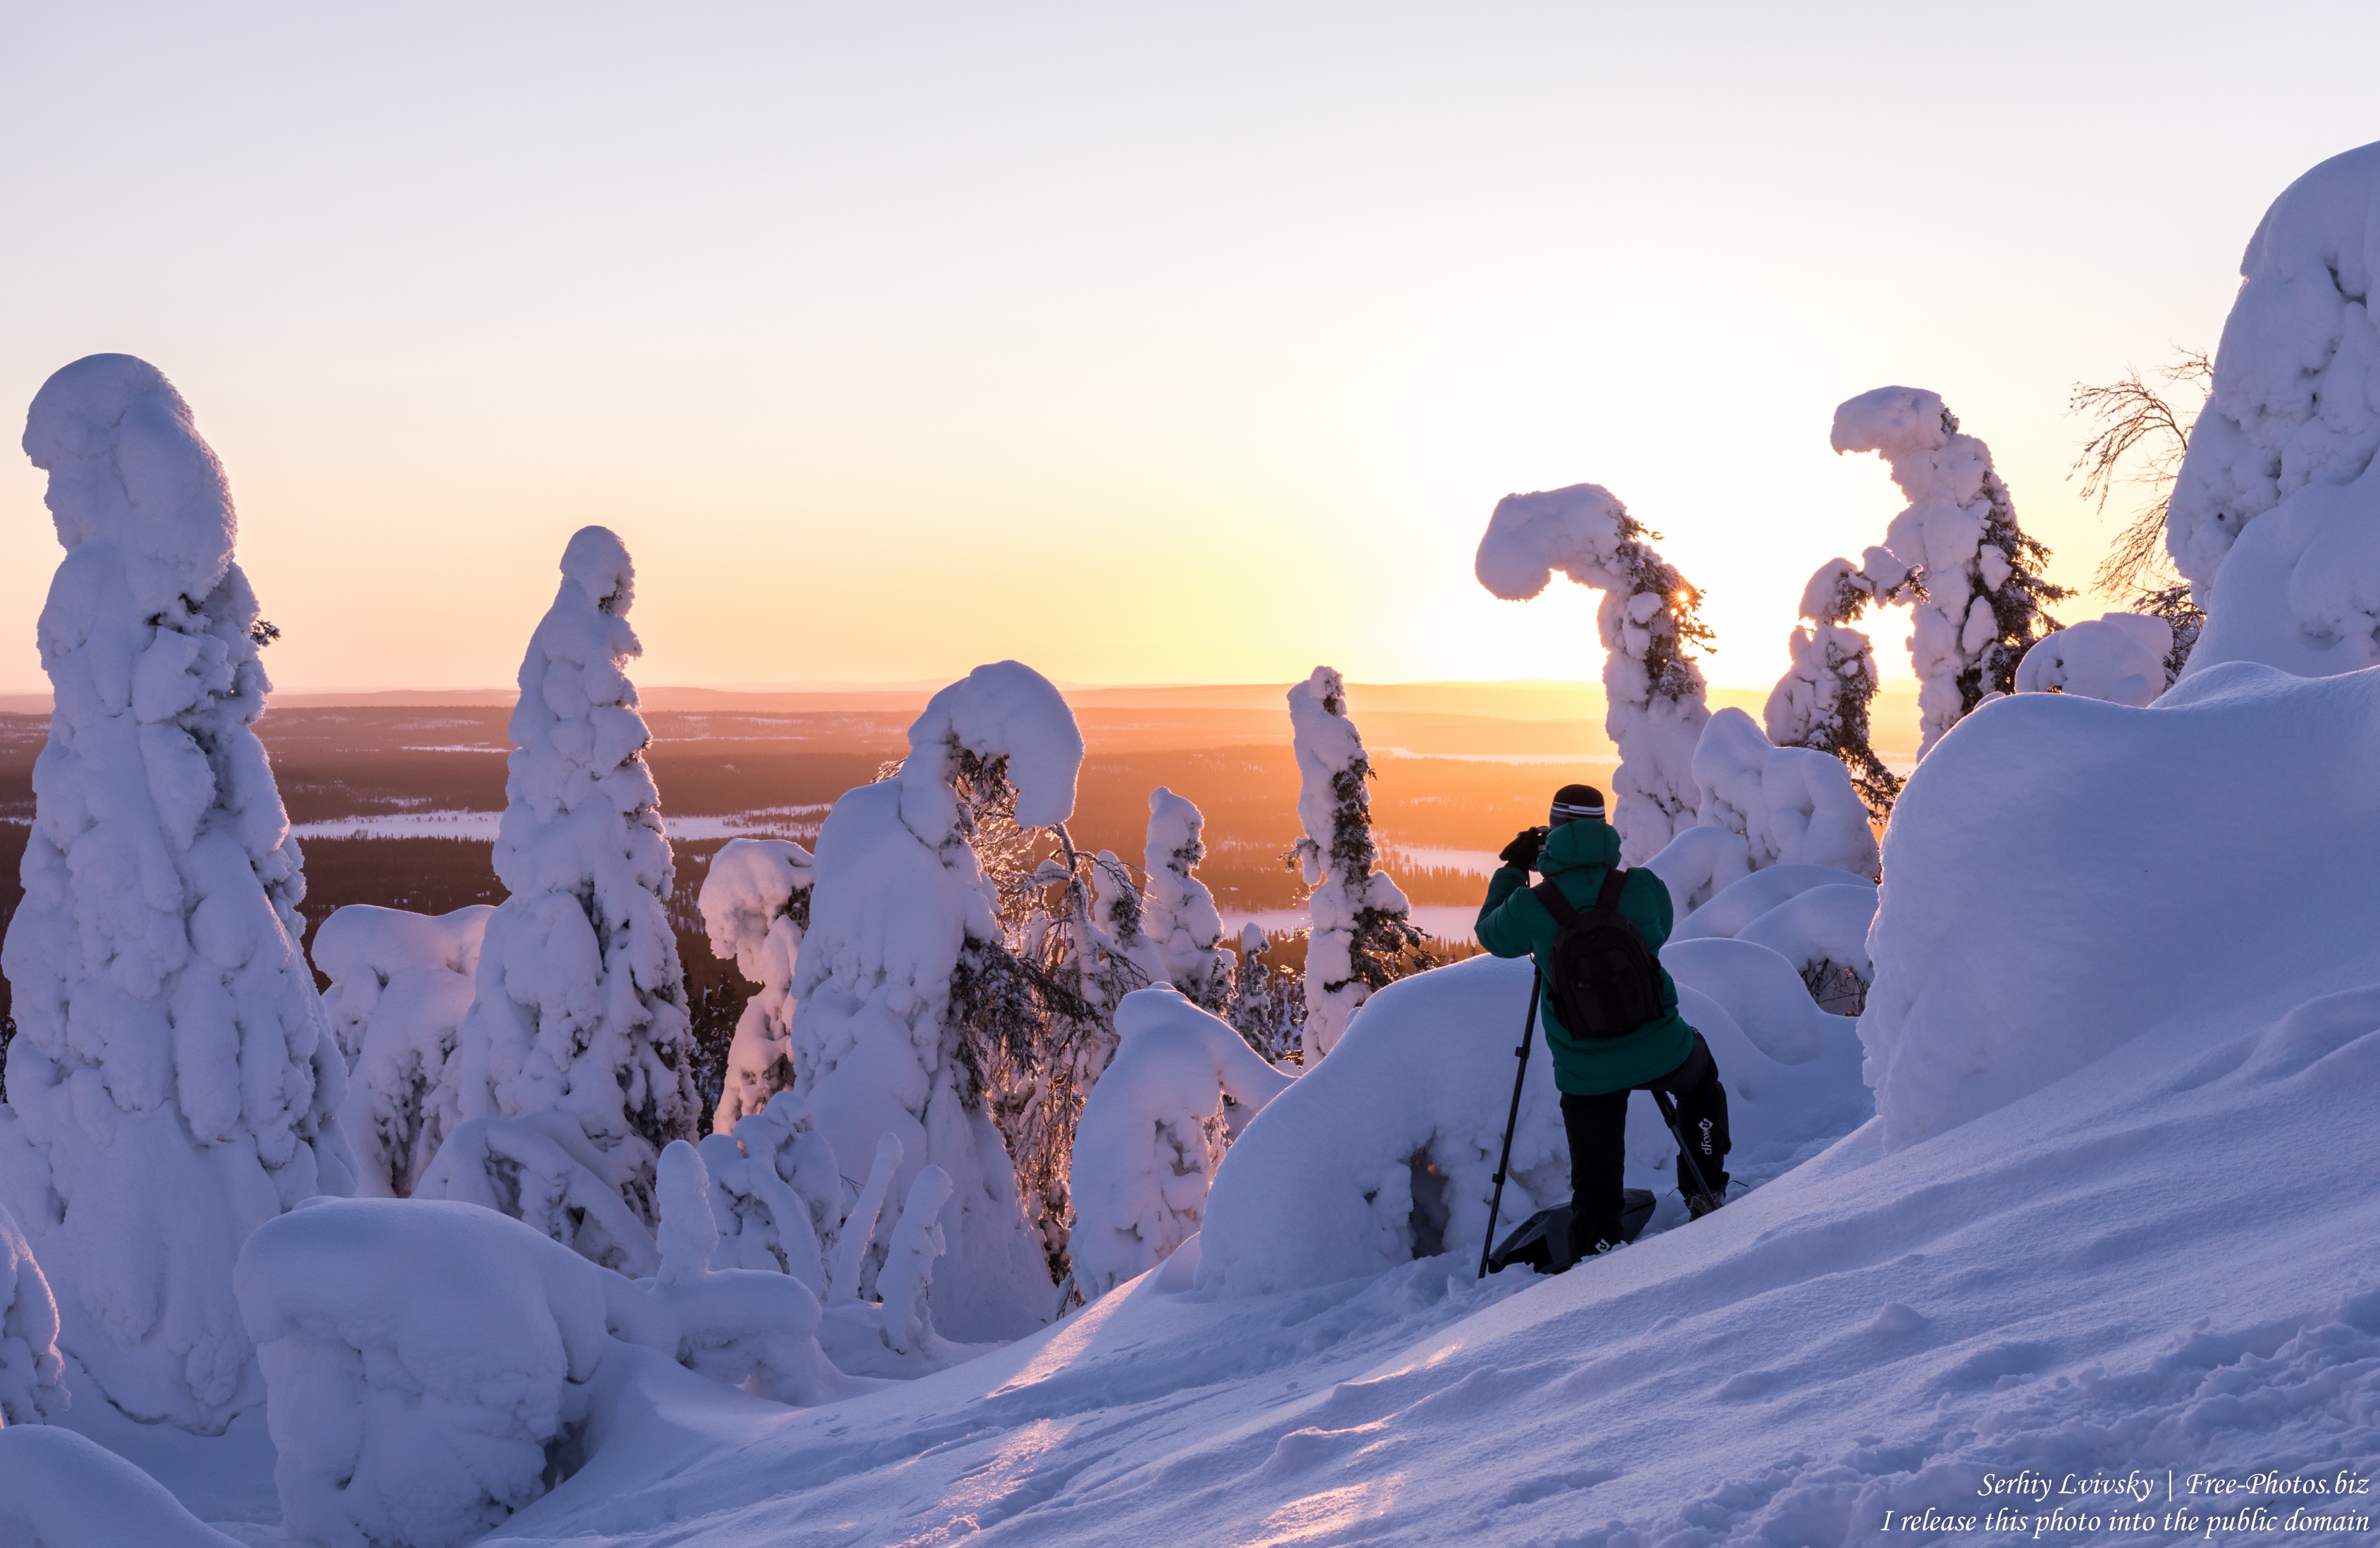 Valtavaara, Finland, photographed in January 2020 by Serhiy Lvivsky, picture 37